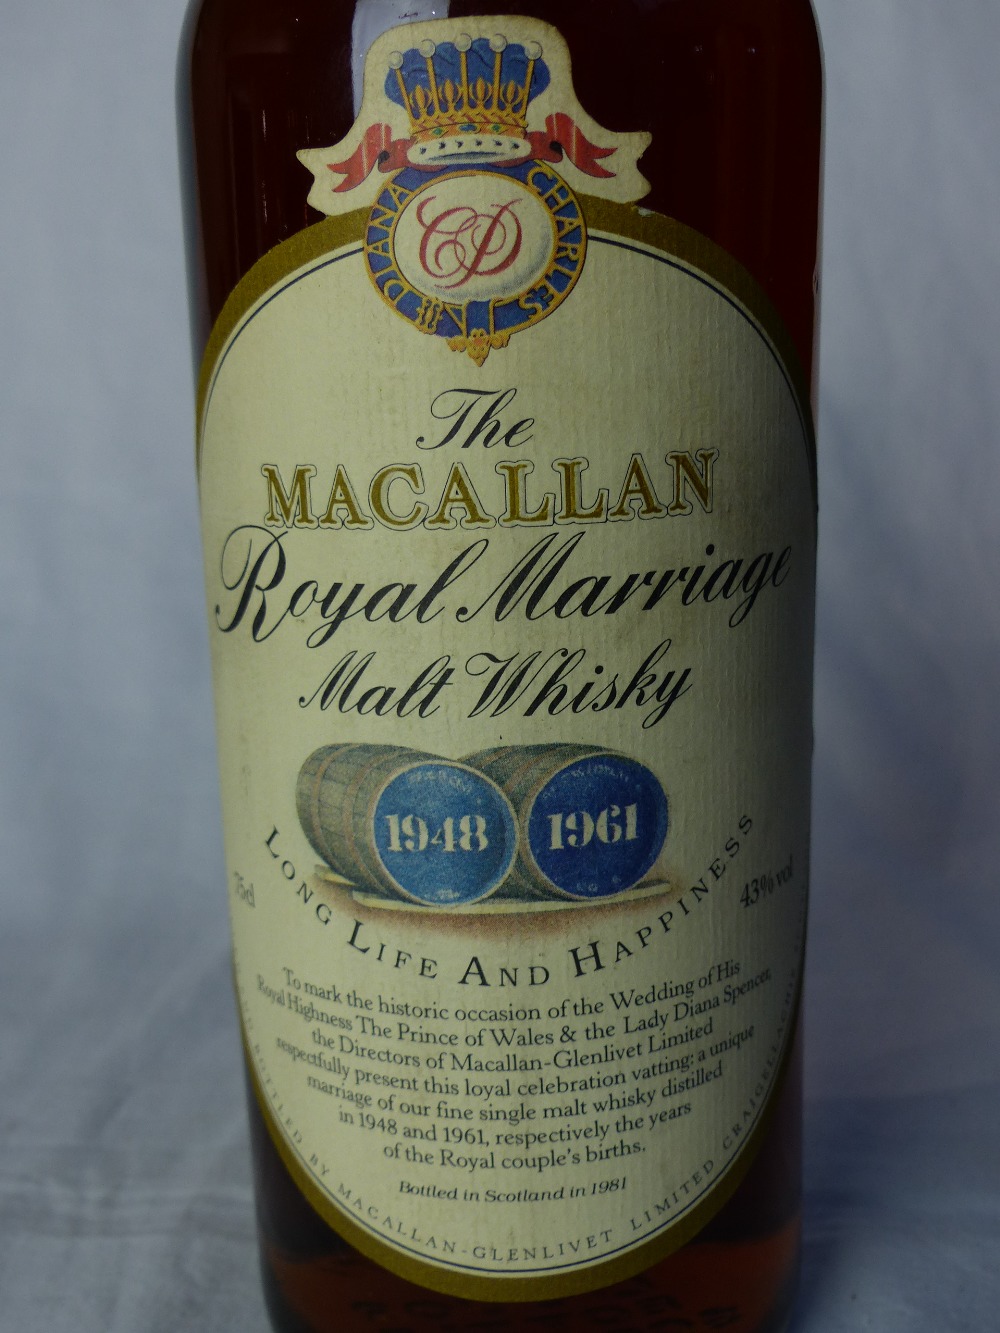 The Macallan Royal Marriage malt whisky, - Image 6 of 6